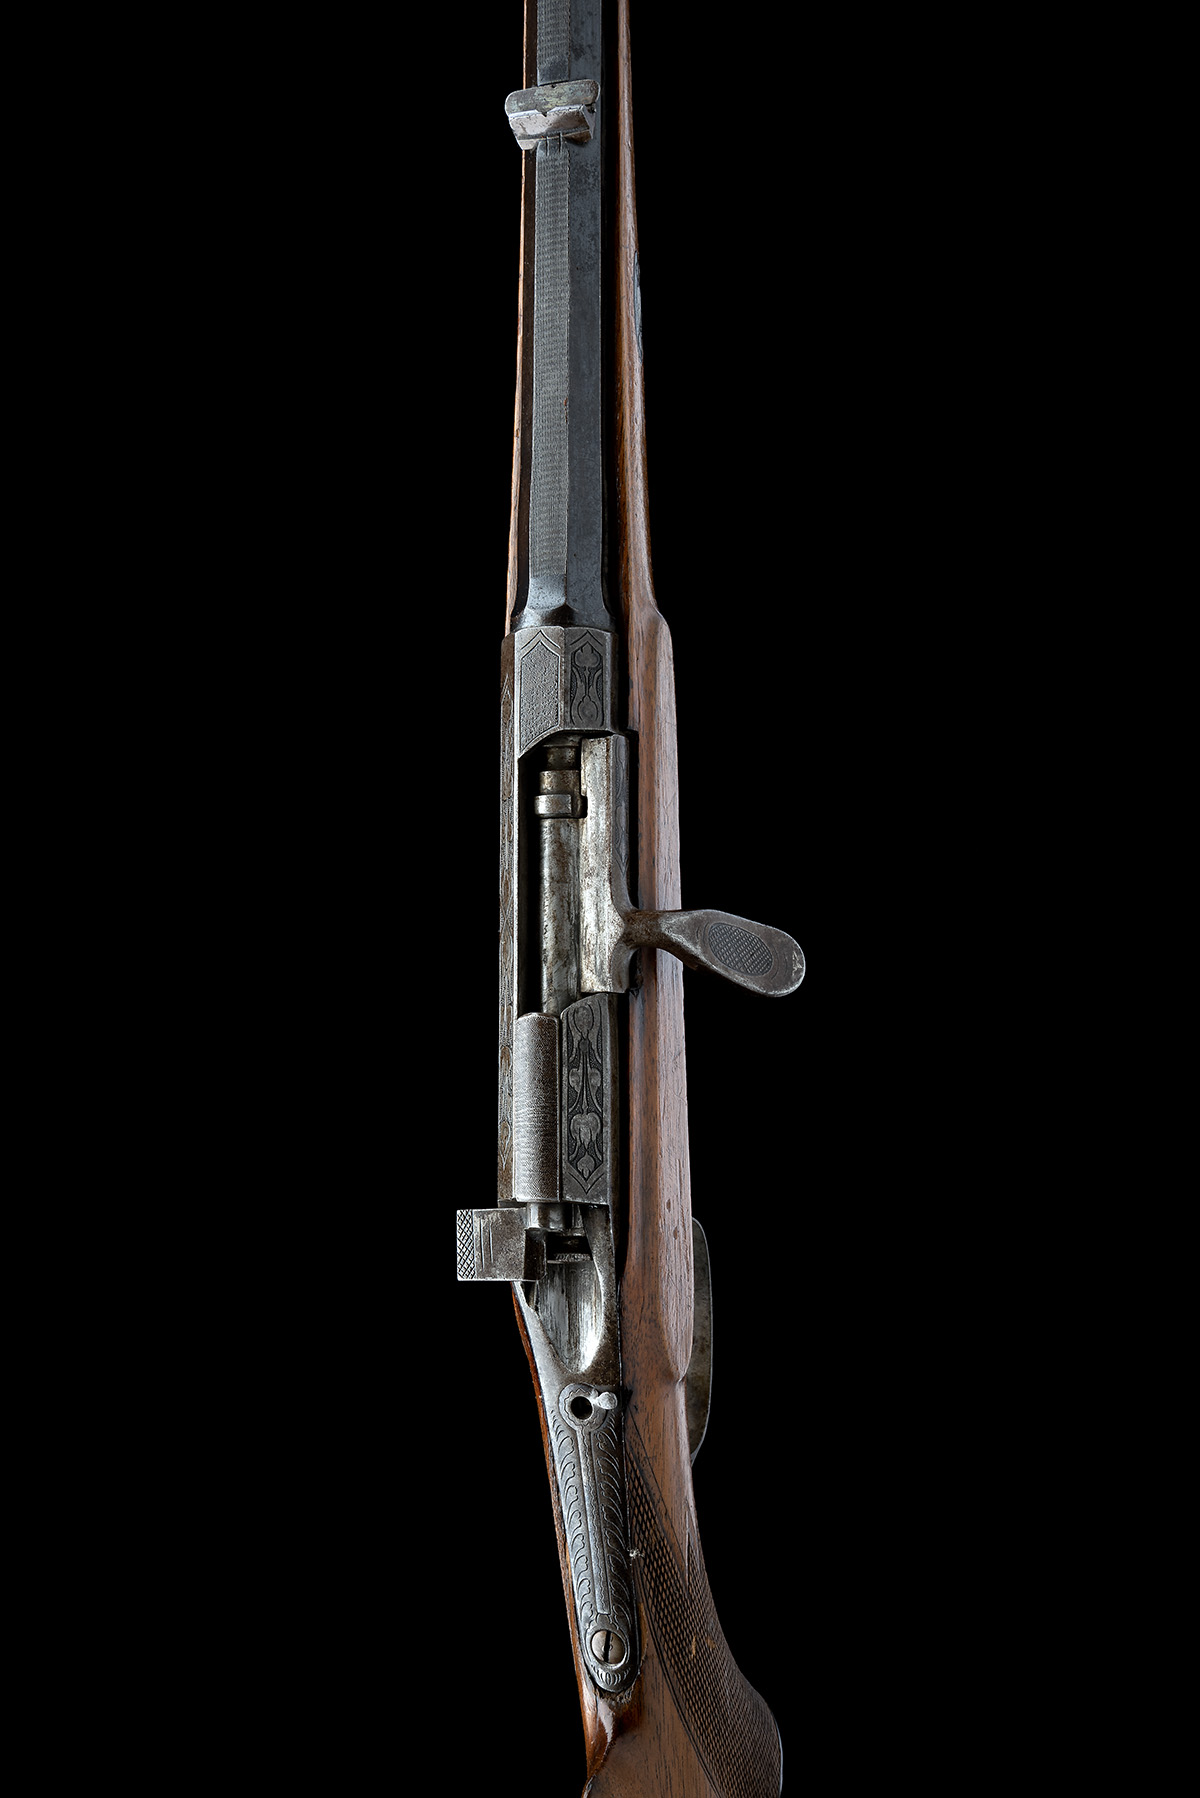 A CONTINENTAL 8.15x46R SINGLE-SHOT BOLT-ACTION SPORTING RIFLE, UNSIGNED, serial no. 3780, of - Image 6 of 8